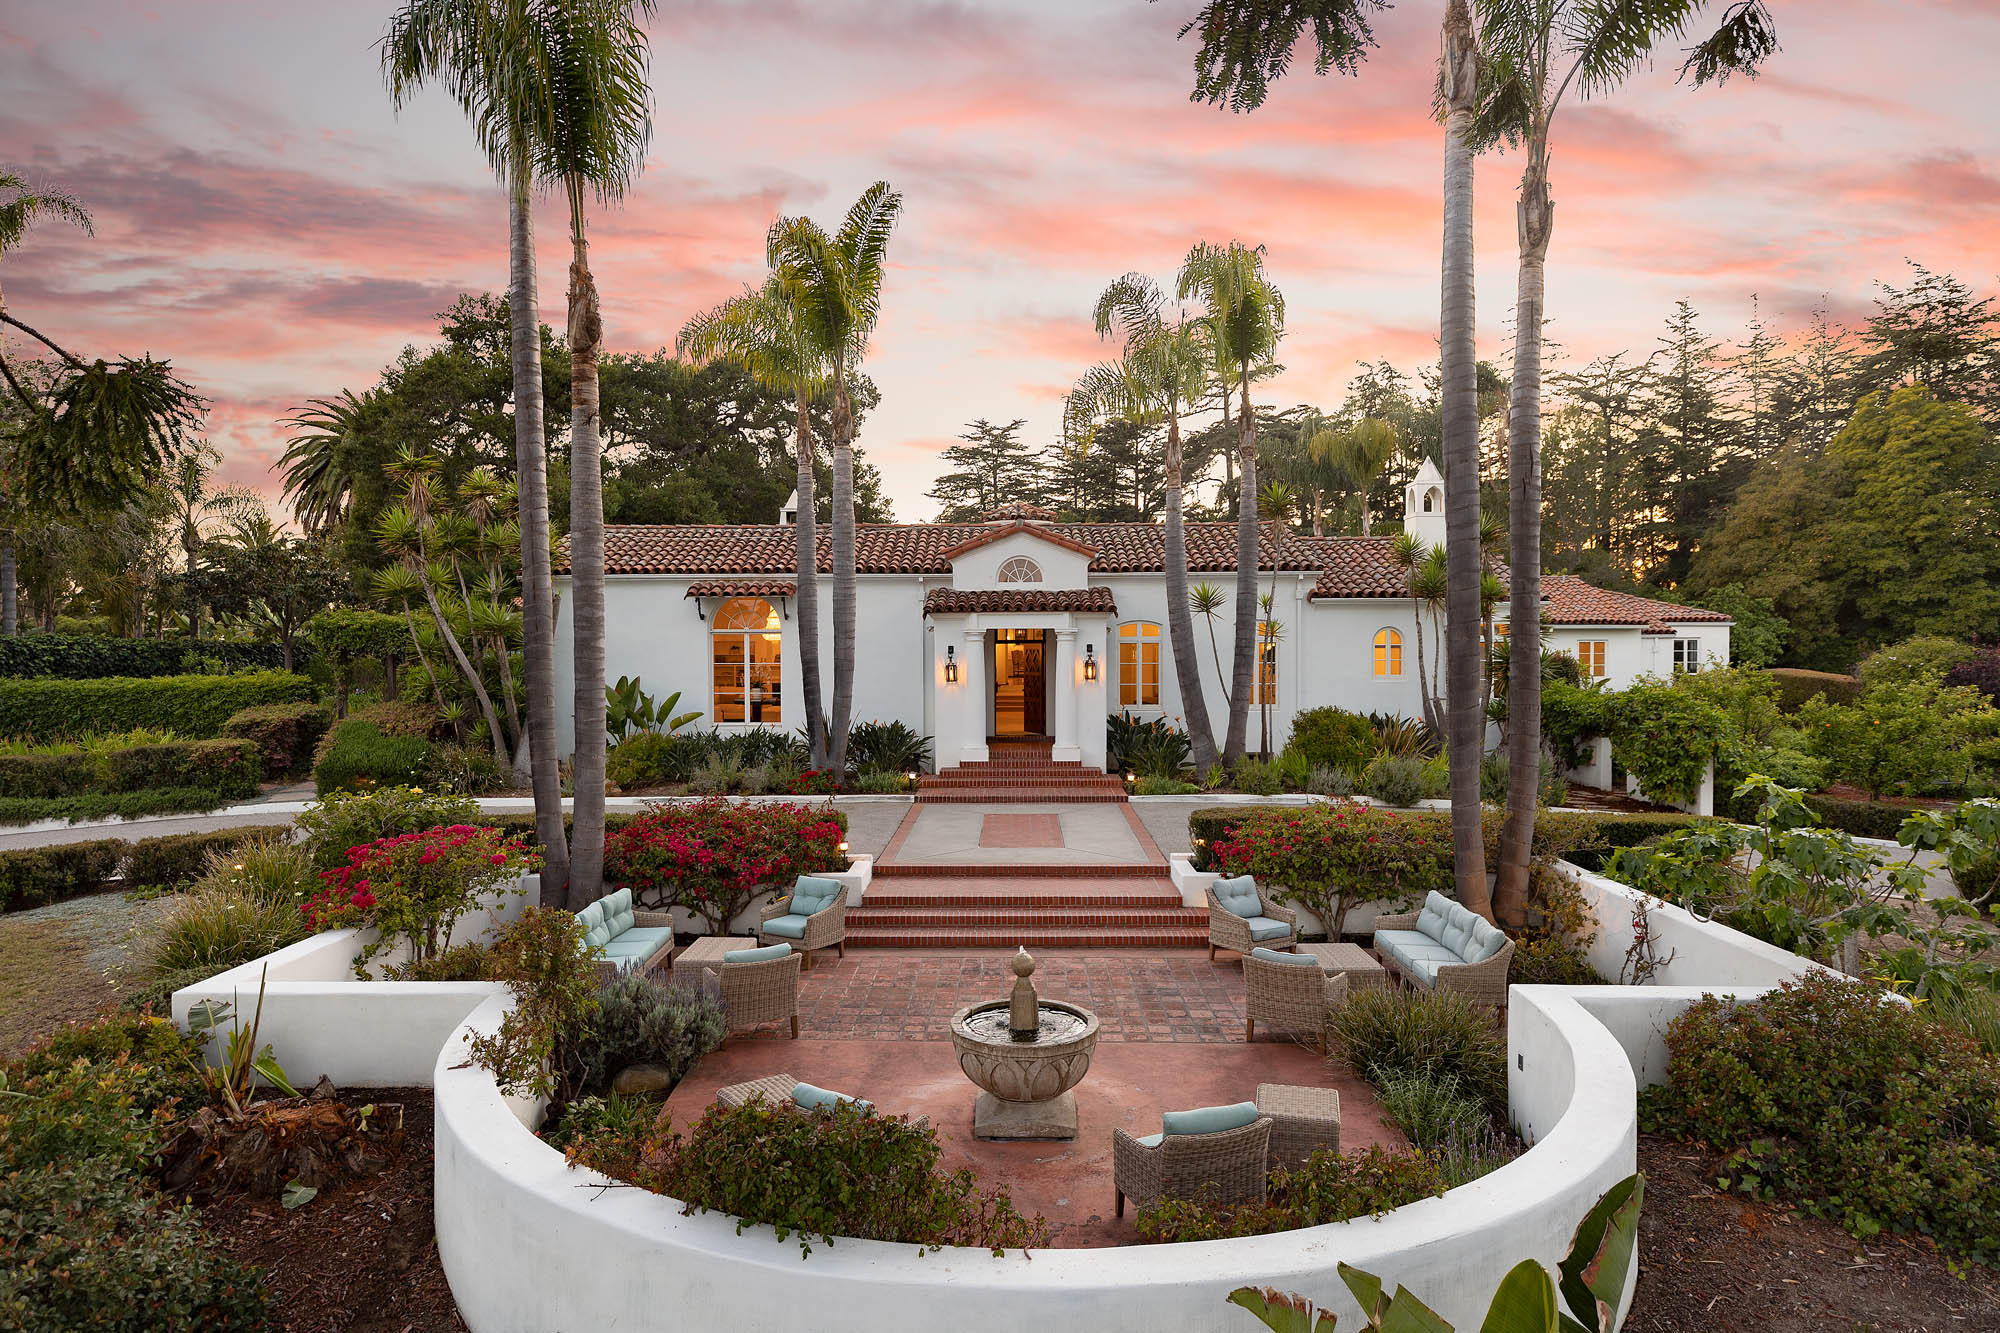 This Spanish Revival stunner is a prime example of how curb appeal can help sell a home